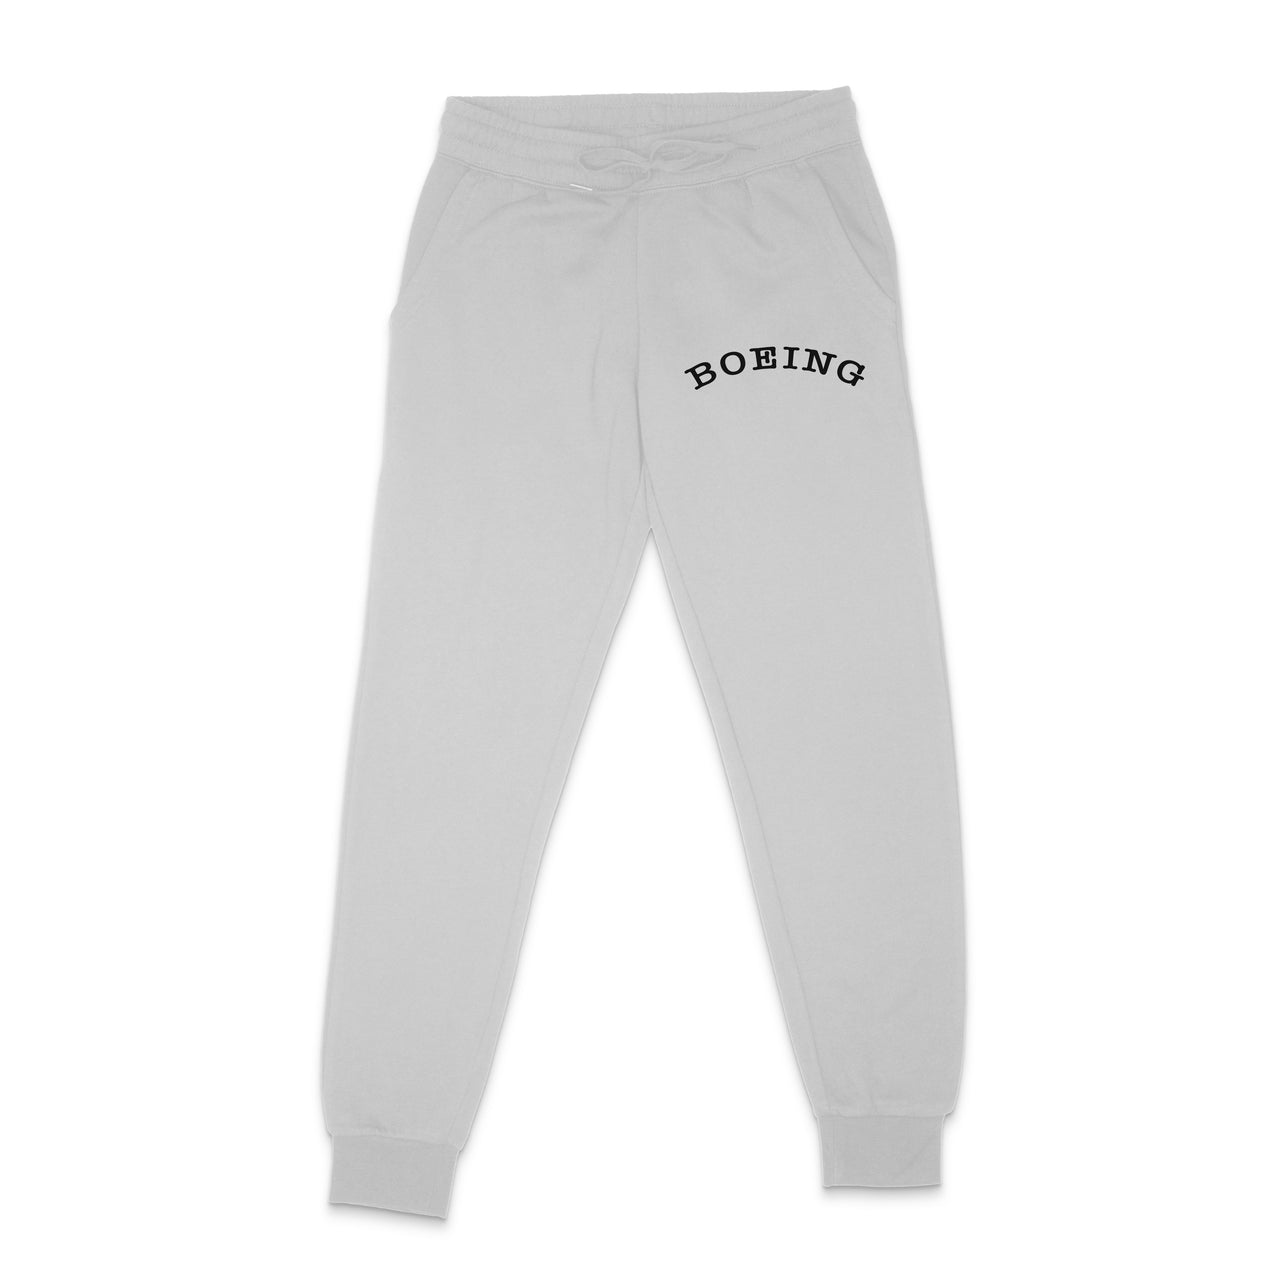 Special BOEING Text Designed Sweatpants